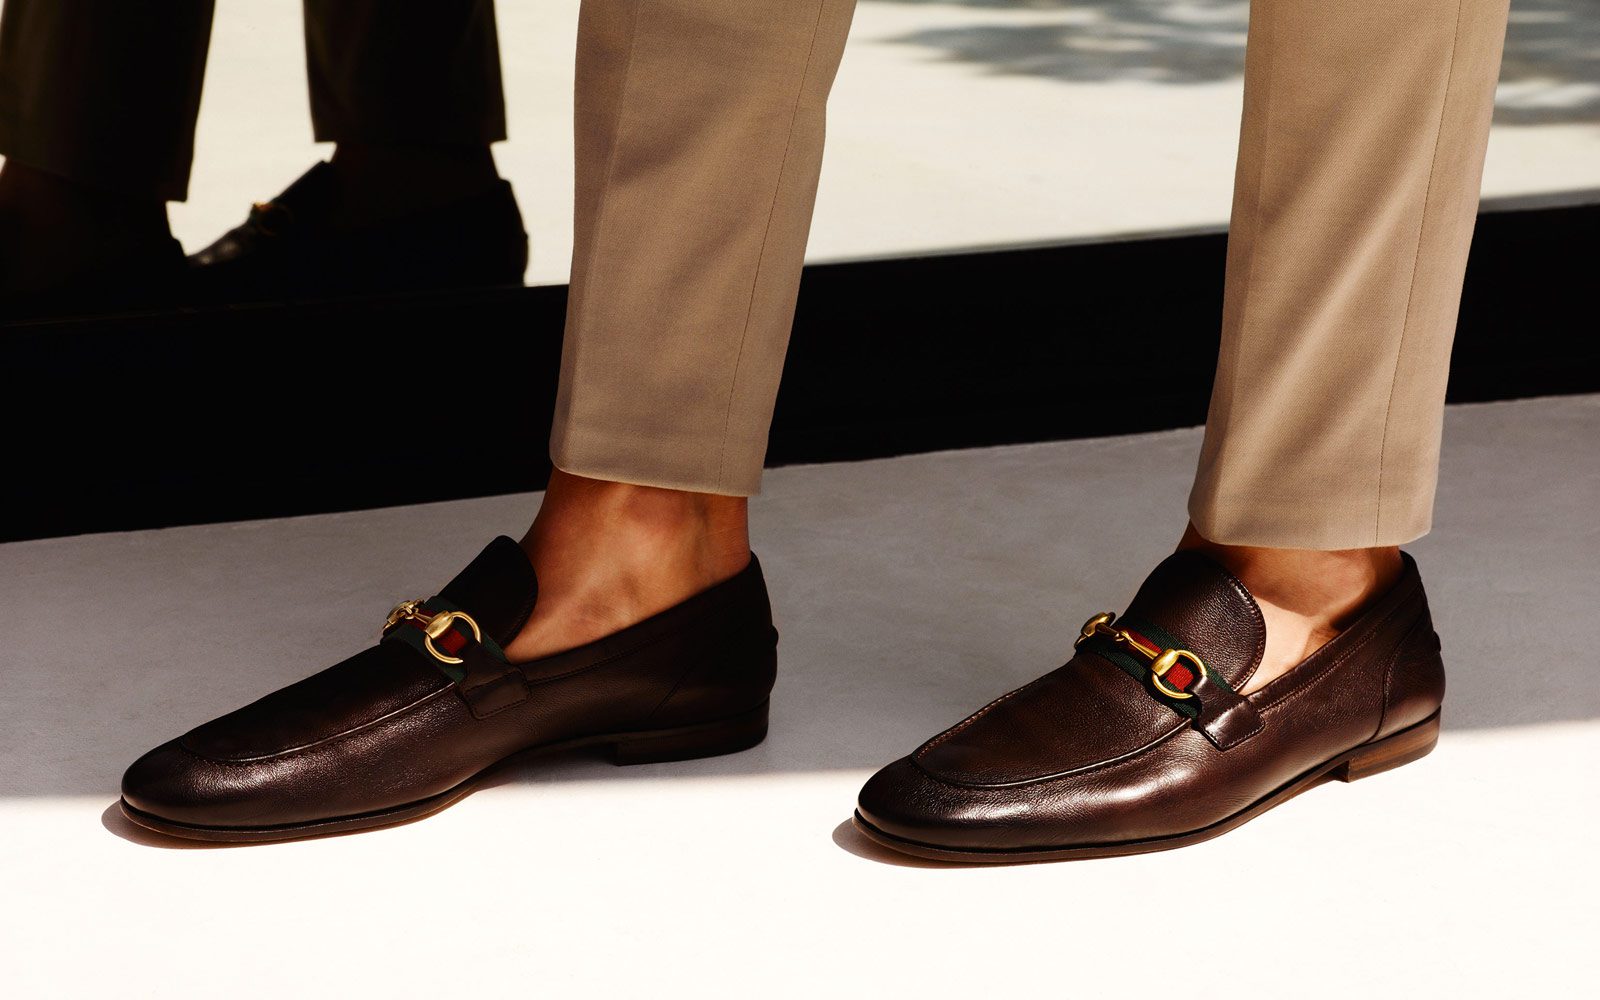 Do You Wear Socks With Loafers? Here's | vlr.eng.br